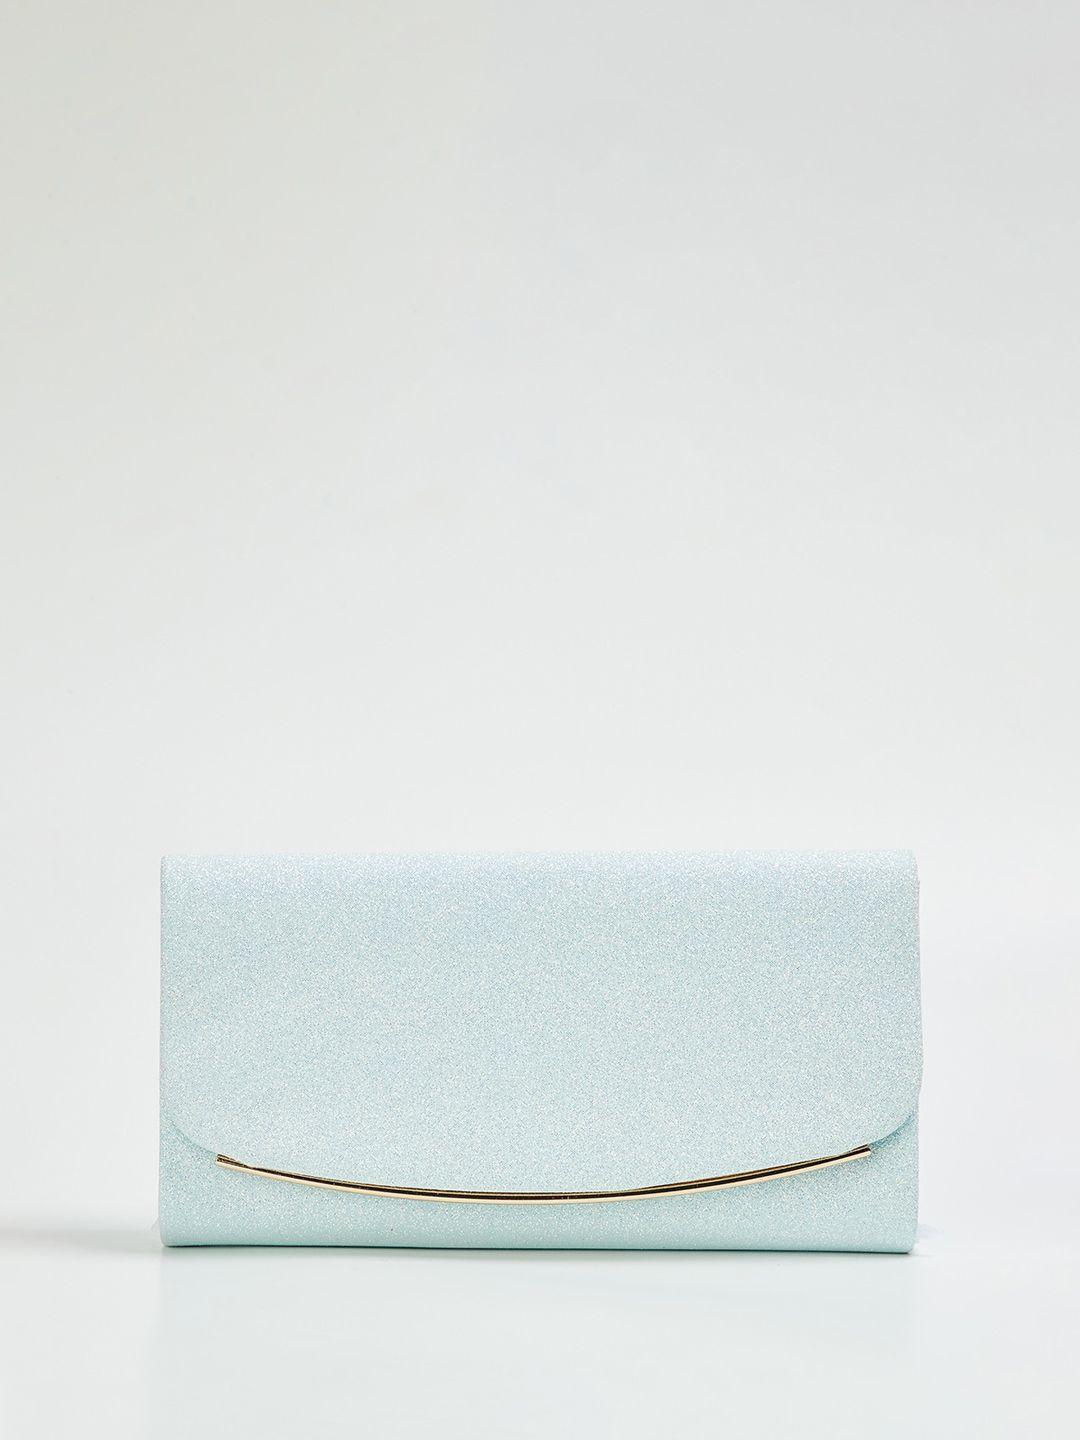 code by lifestyle embellished envelope clutch